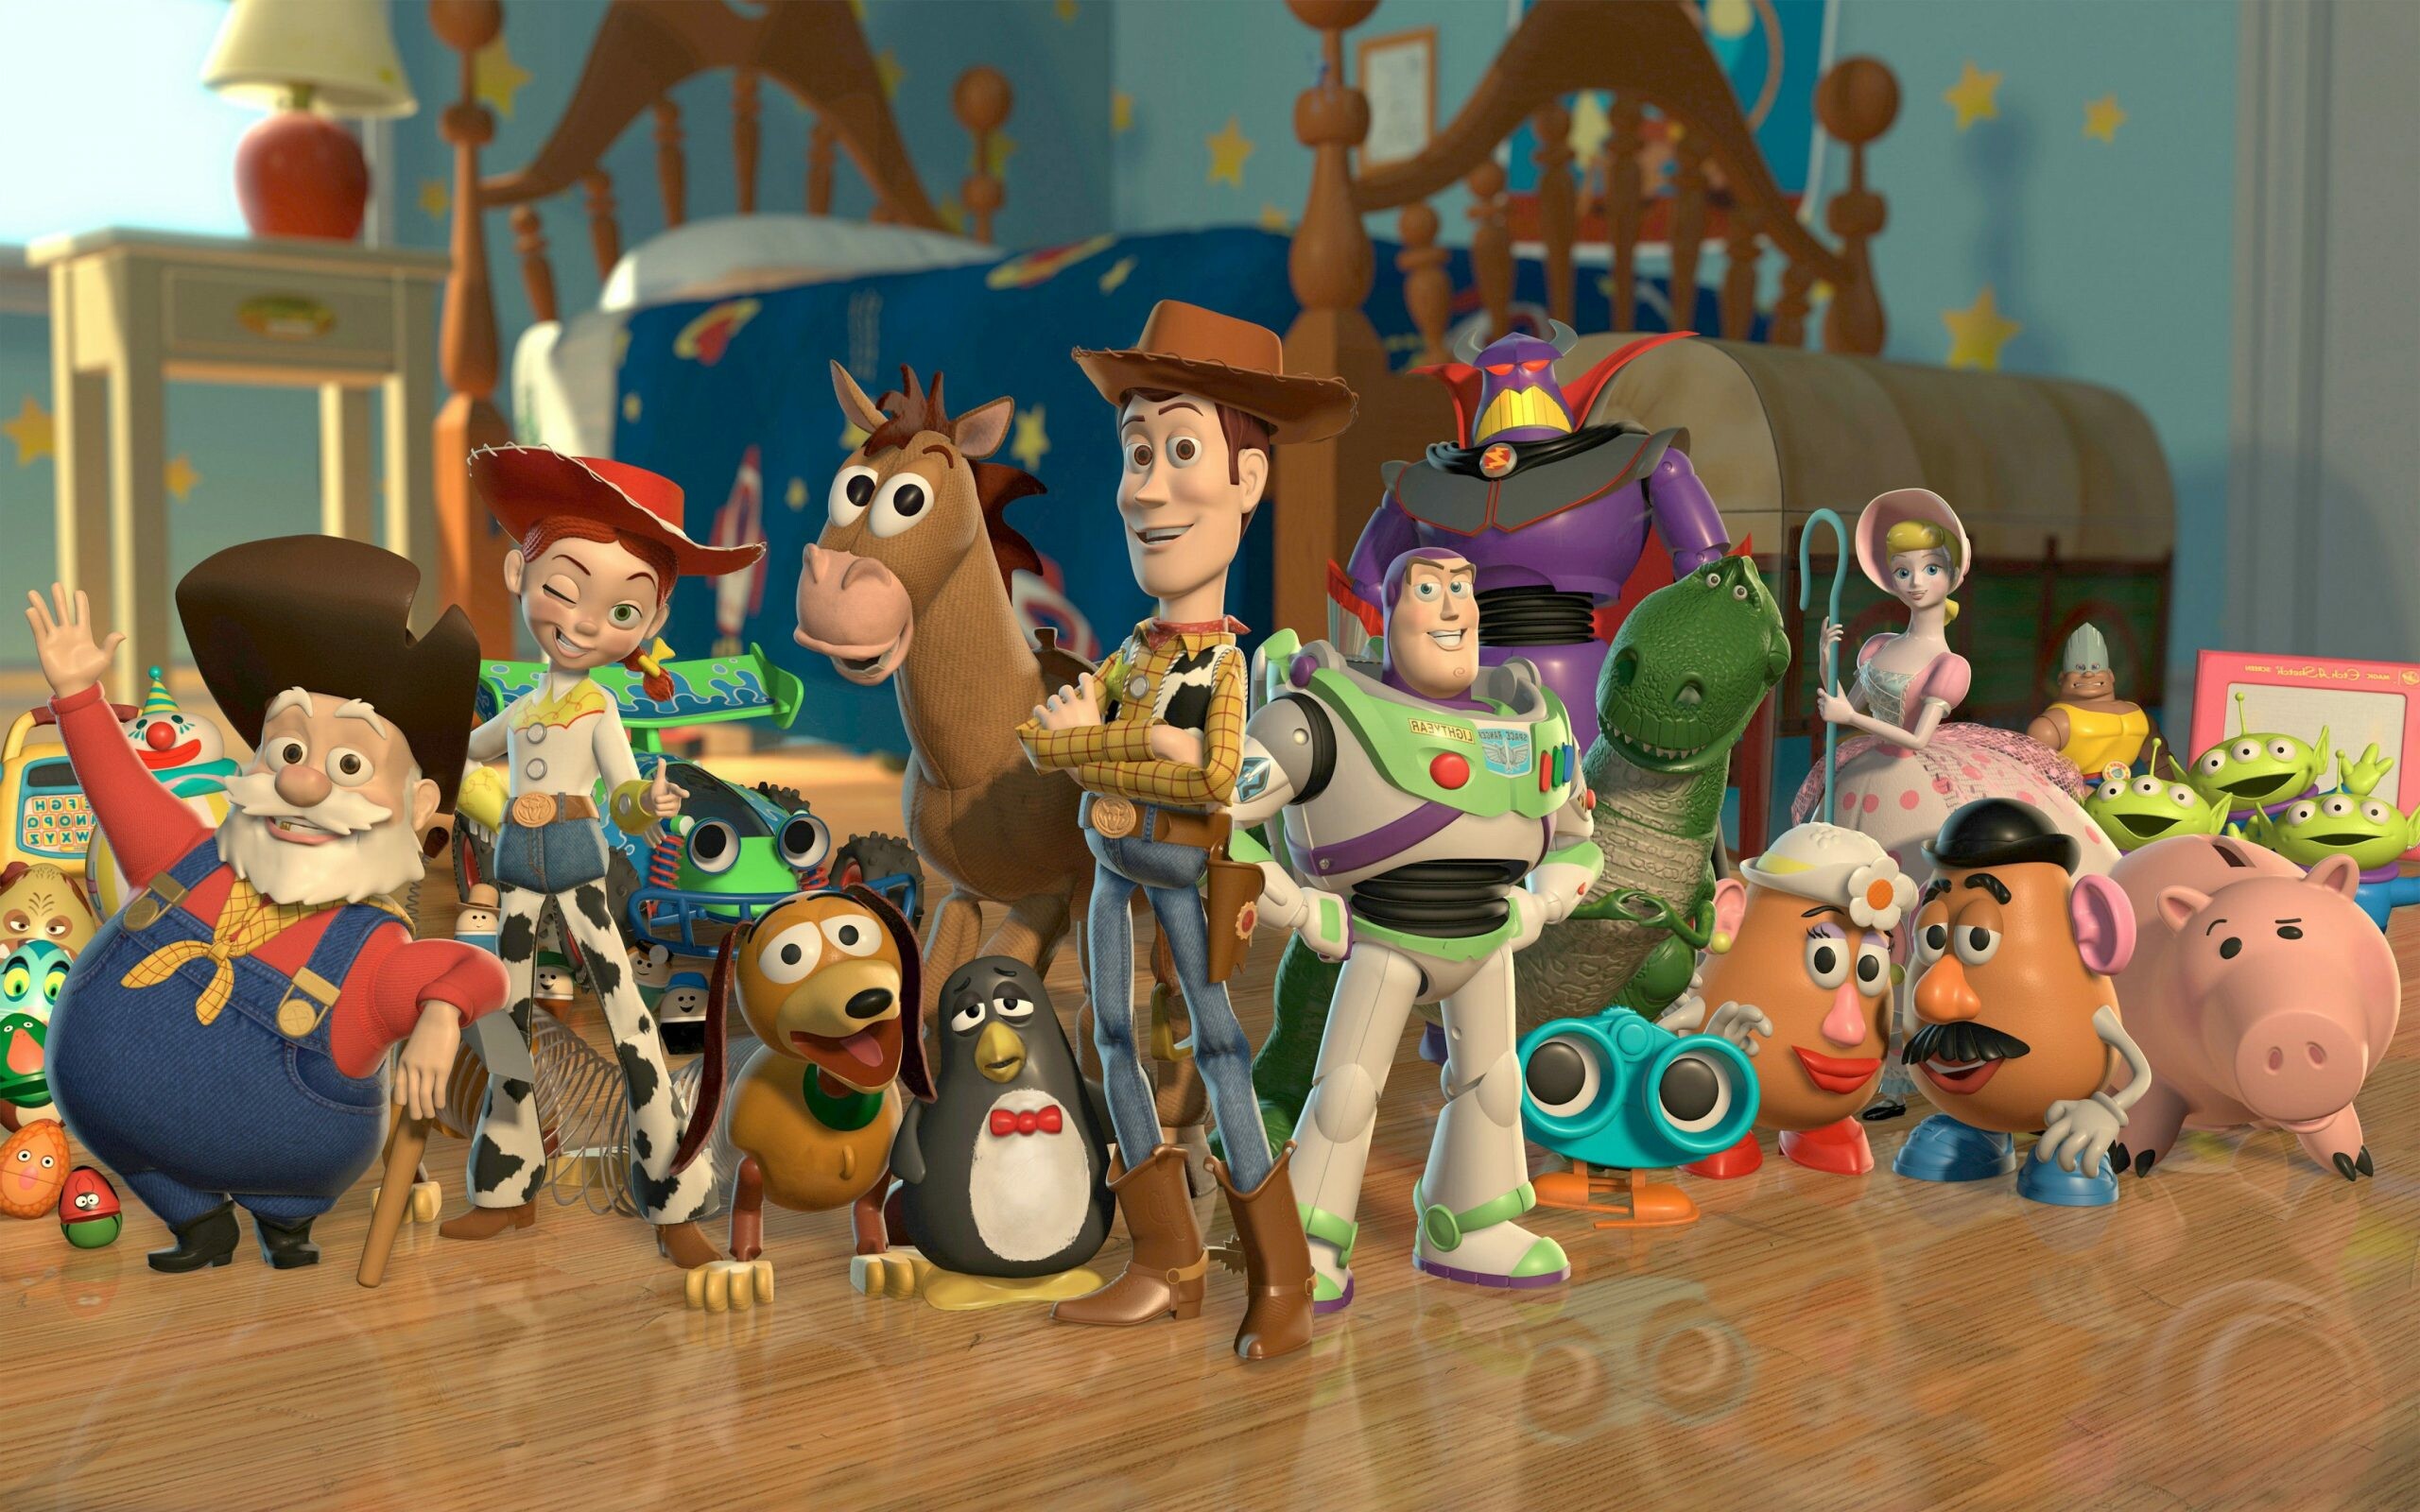 Toy Story: Directed by John Lasseter, co-directed by Ash Brannon and Lee Unkrich. 2560x1600 HD Wallpaper.